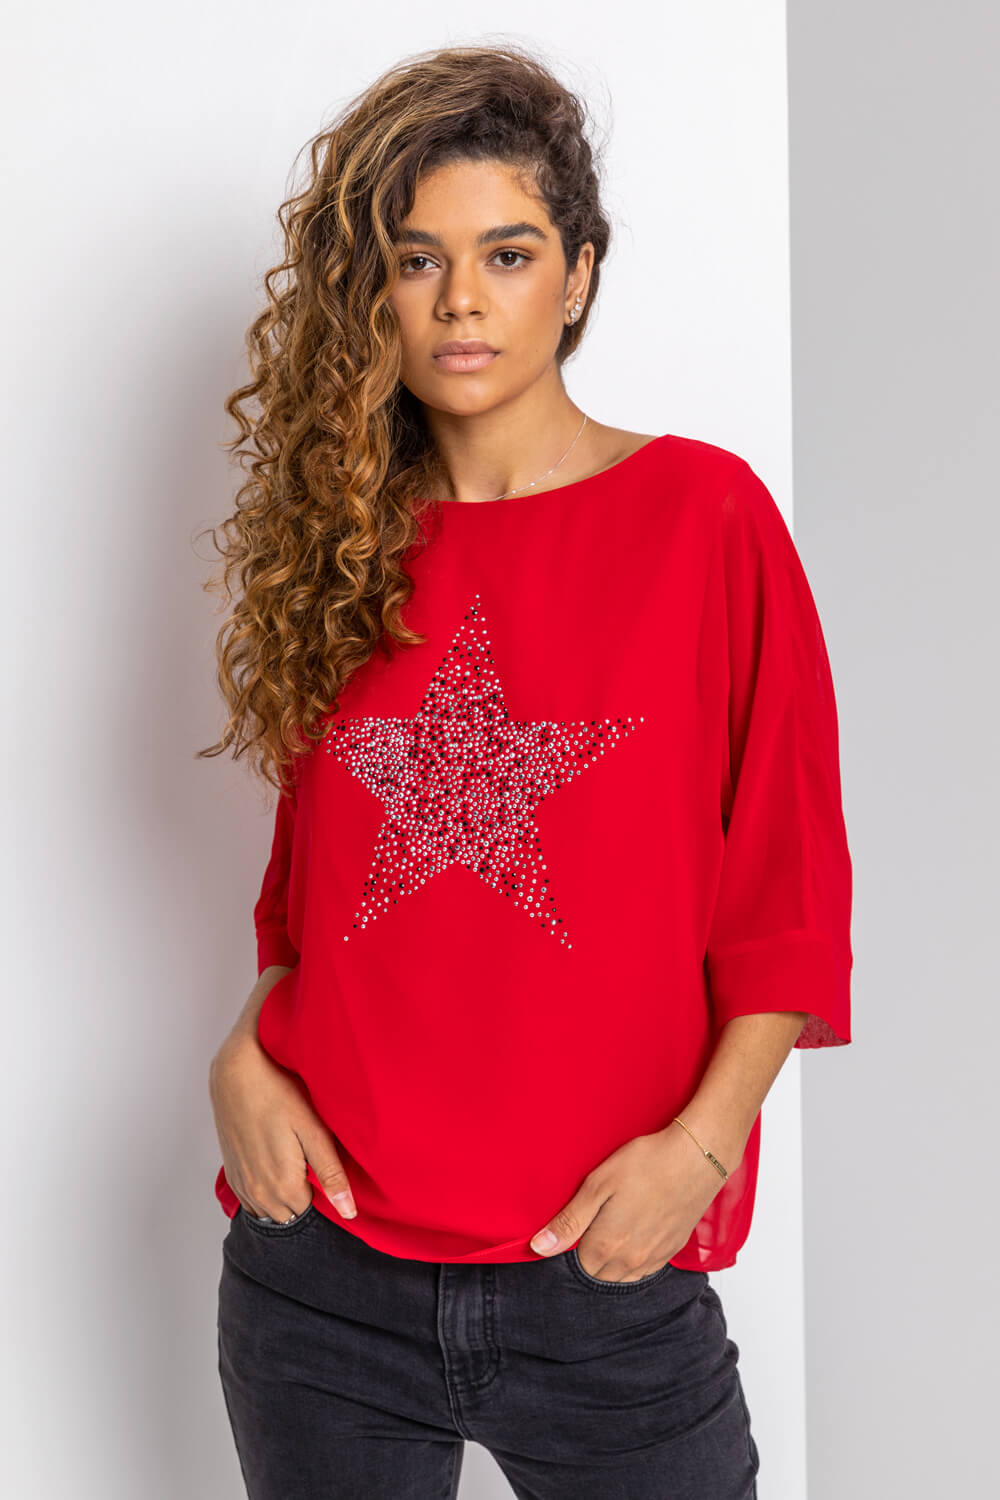 Red Star Embellished Chiffon Top, Image 5 of 5